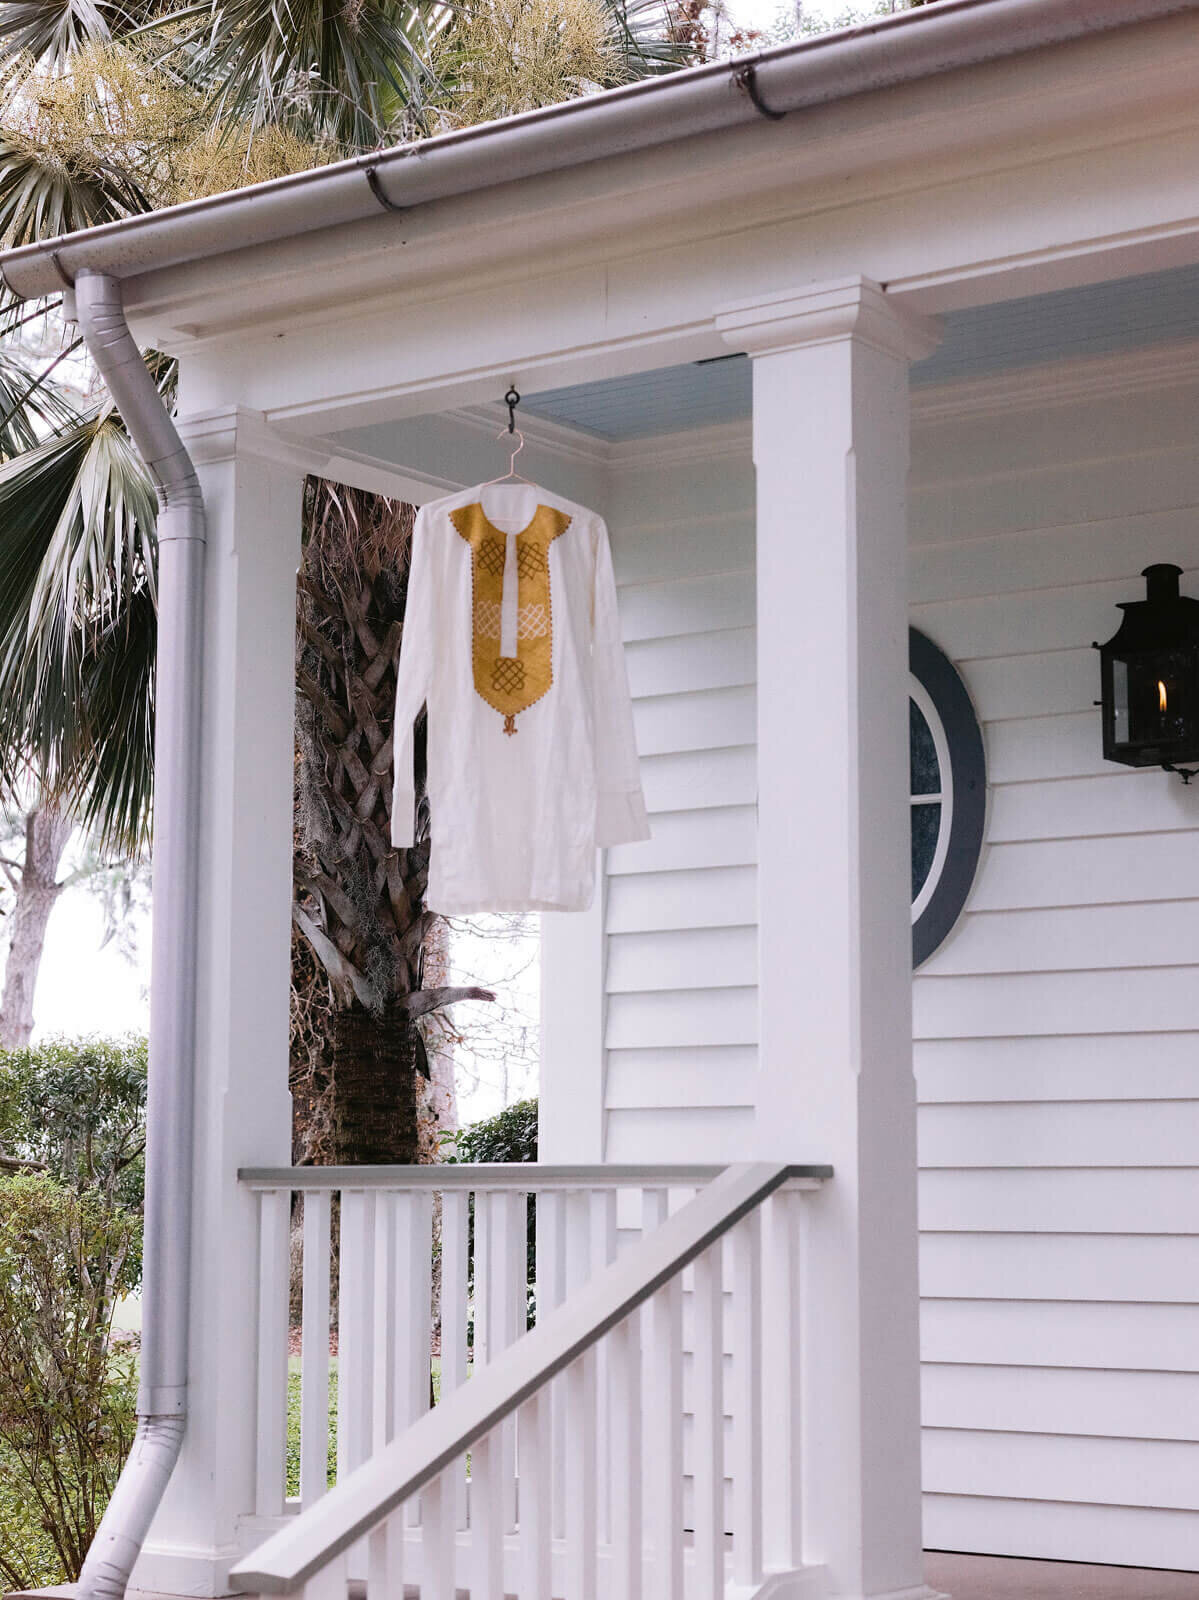 The groom's traditional white African top is hung in front of a house in Montage at Palmetto Bluff. Destination image by Jenny Fu Studio